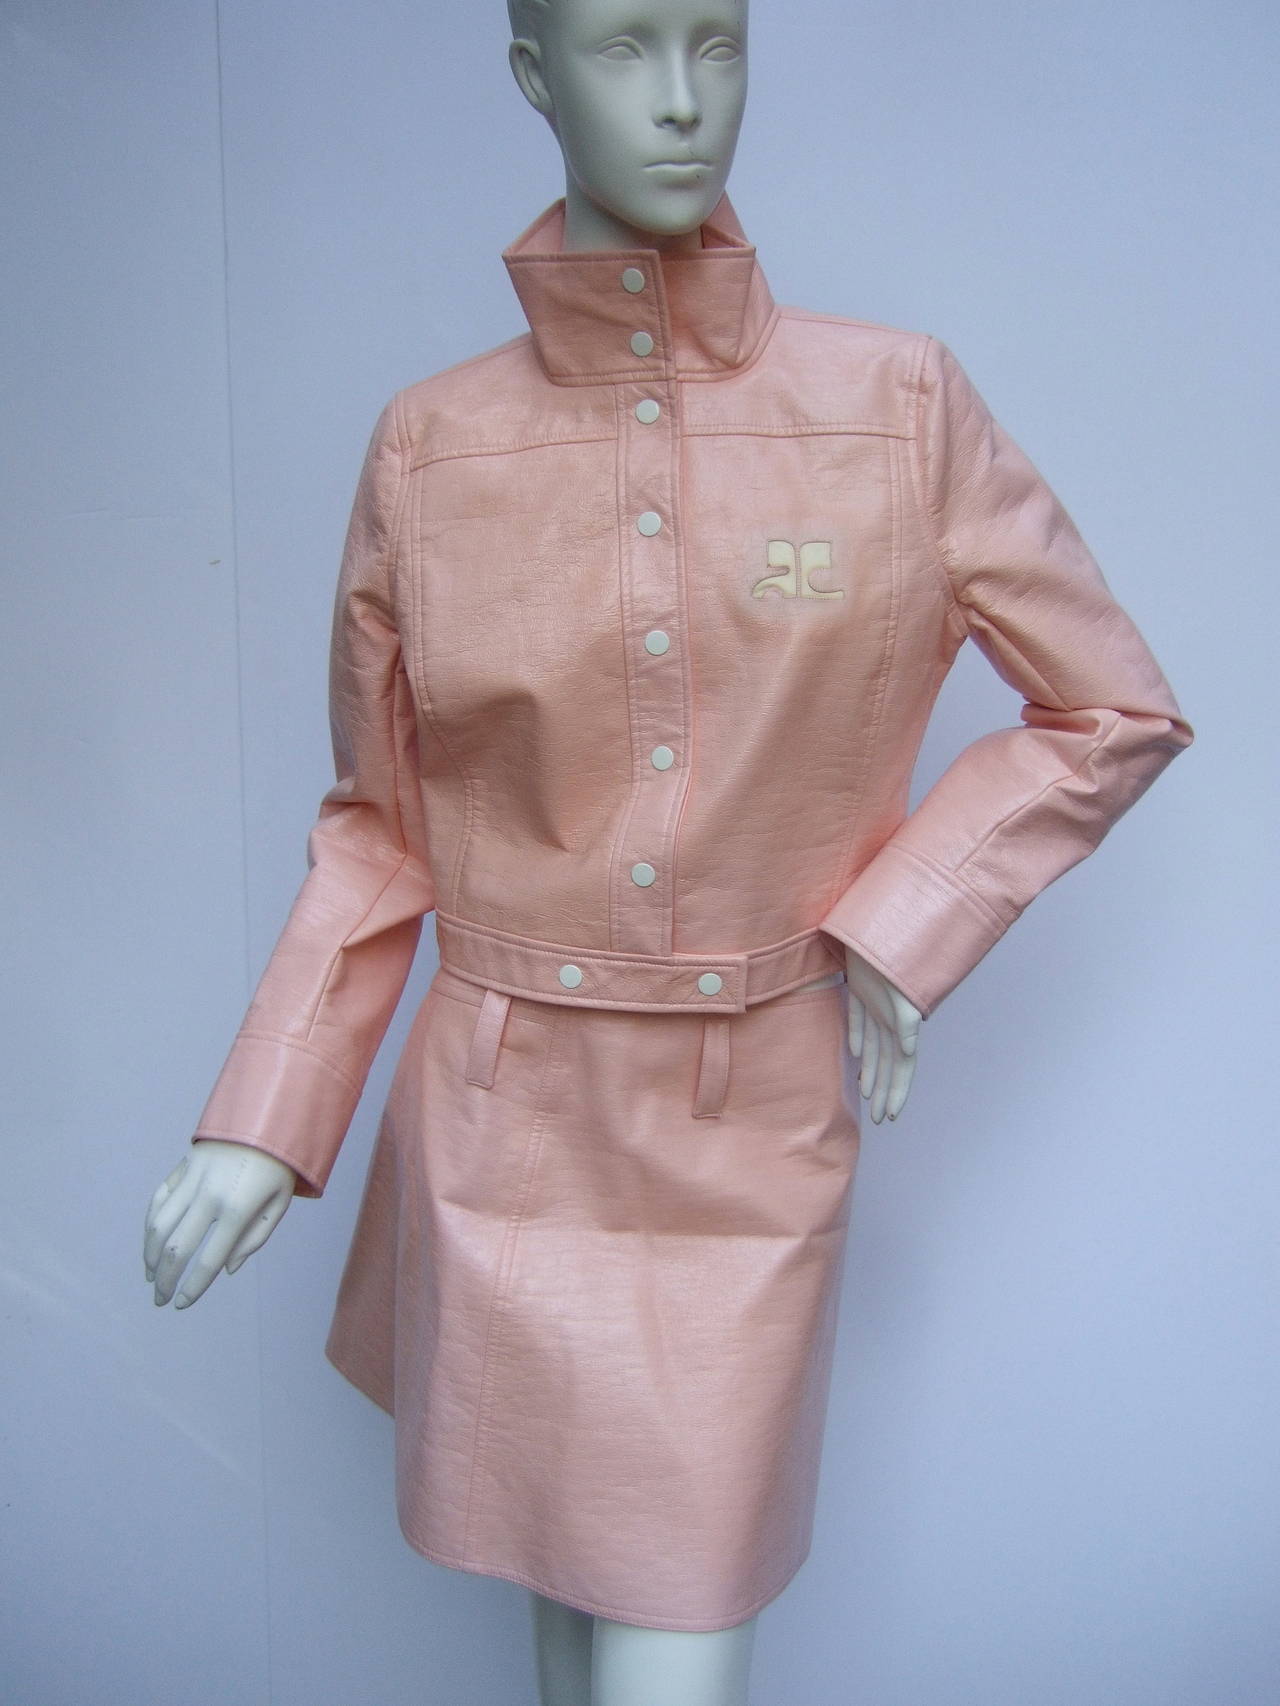 Courreges Paris Iconic cotton candy pink vinyl jacket & skirt Size 40
The crushed vinyl jacket is designed with Courreges's signature initials 
The jacket has a stand up collar & white enamel snap buttons
The jacket waist band overlaps in the